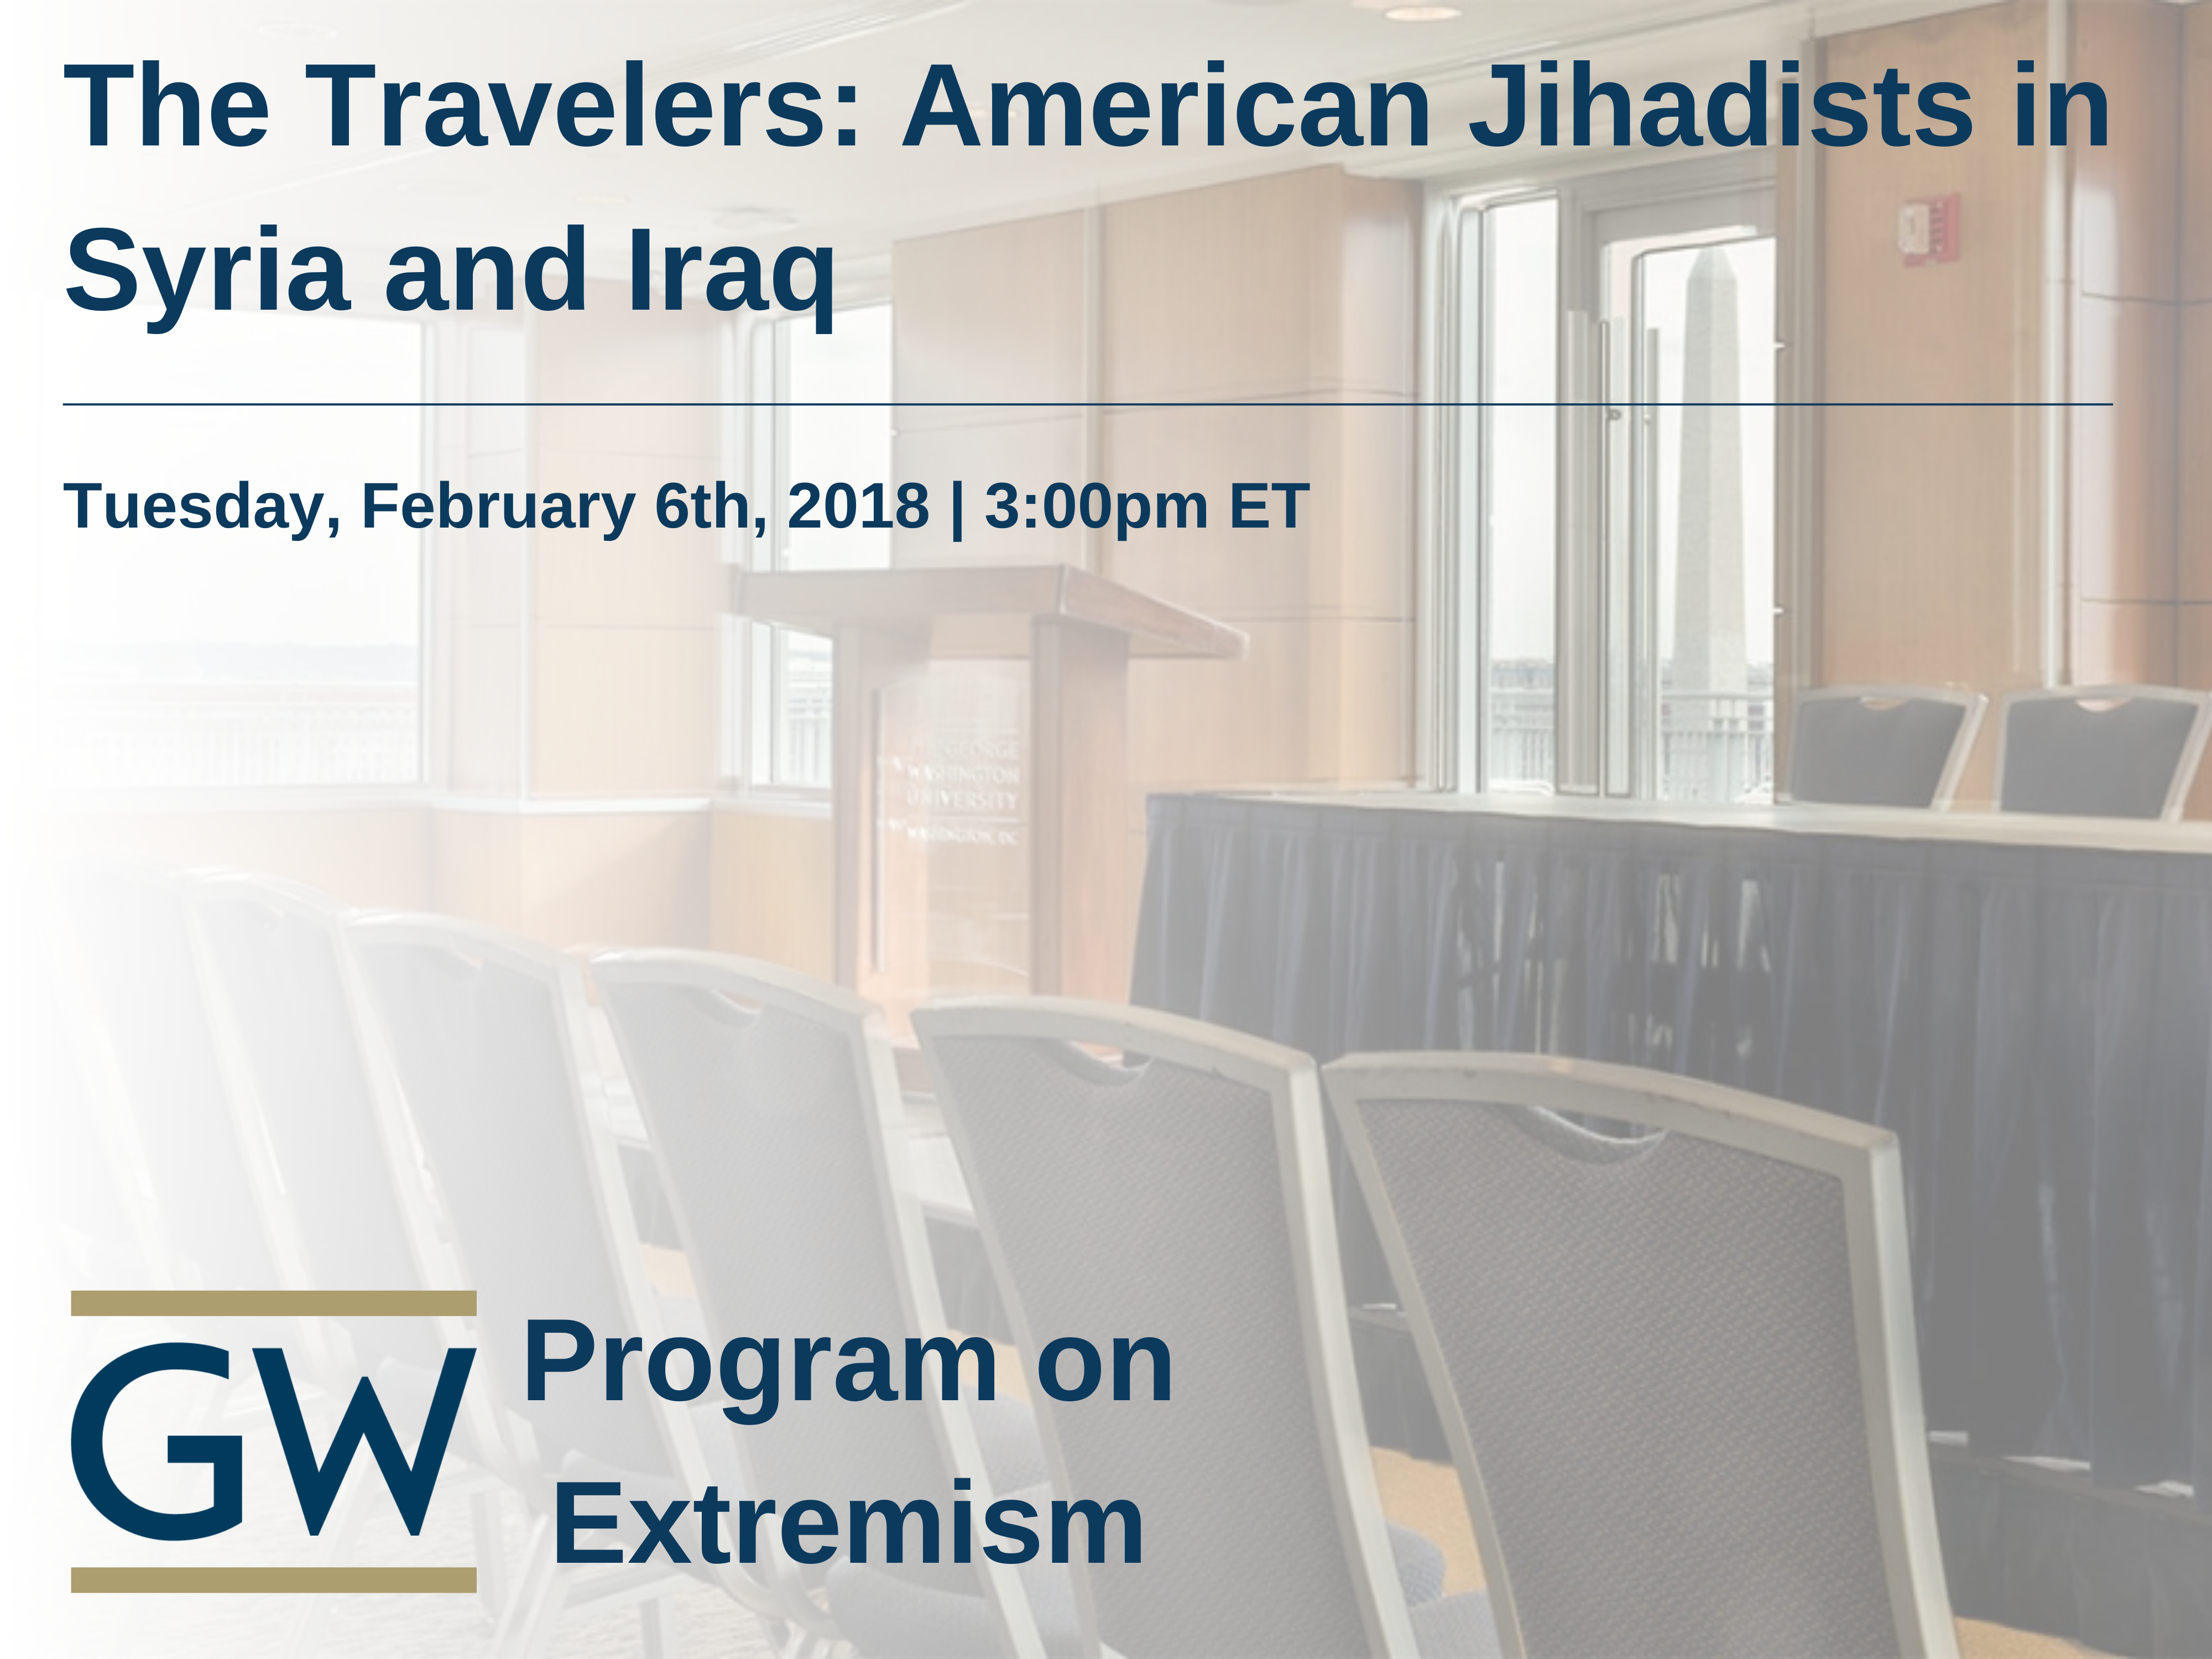 The Travelers: American Jihadists in Syria and Iraq Event Banner